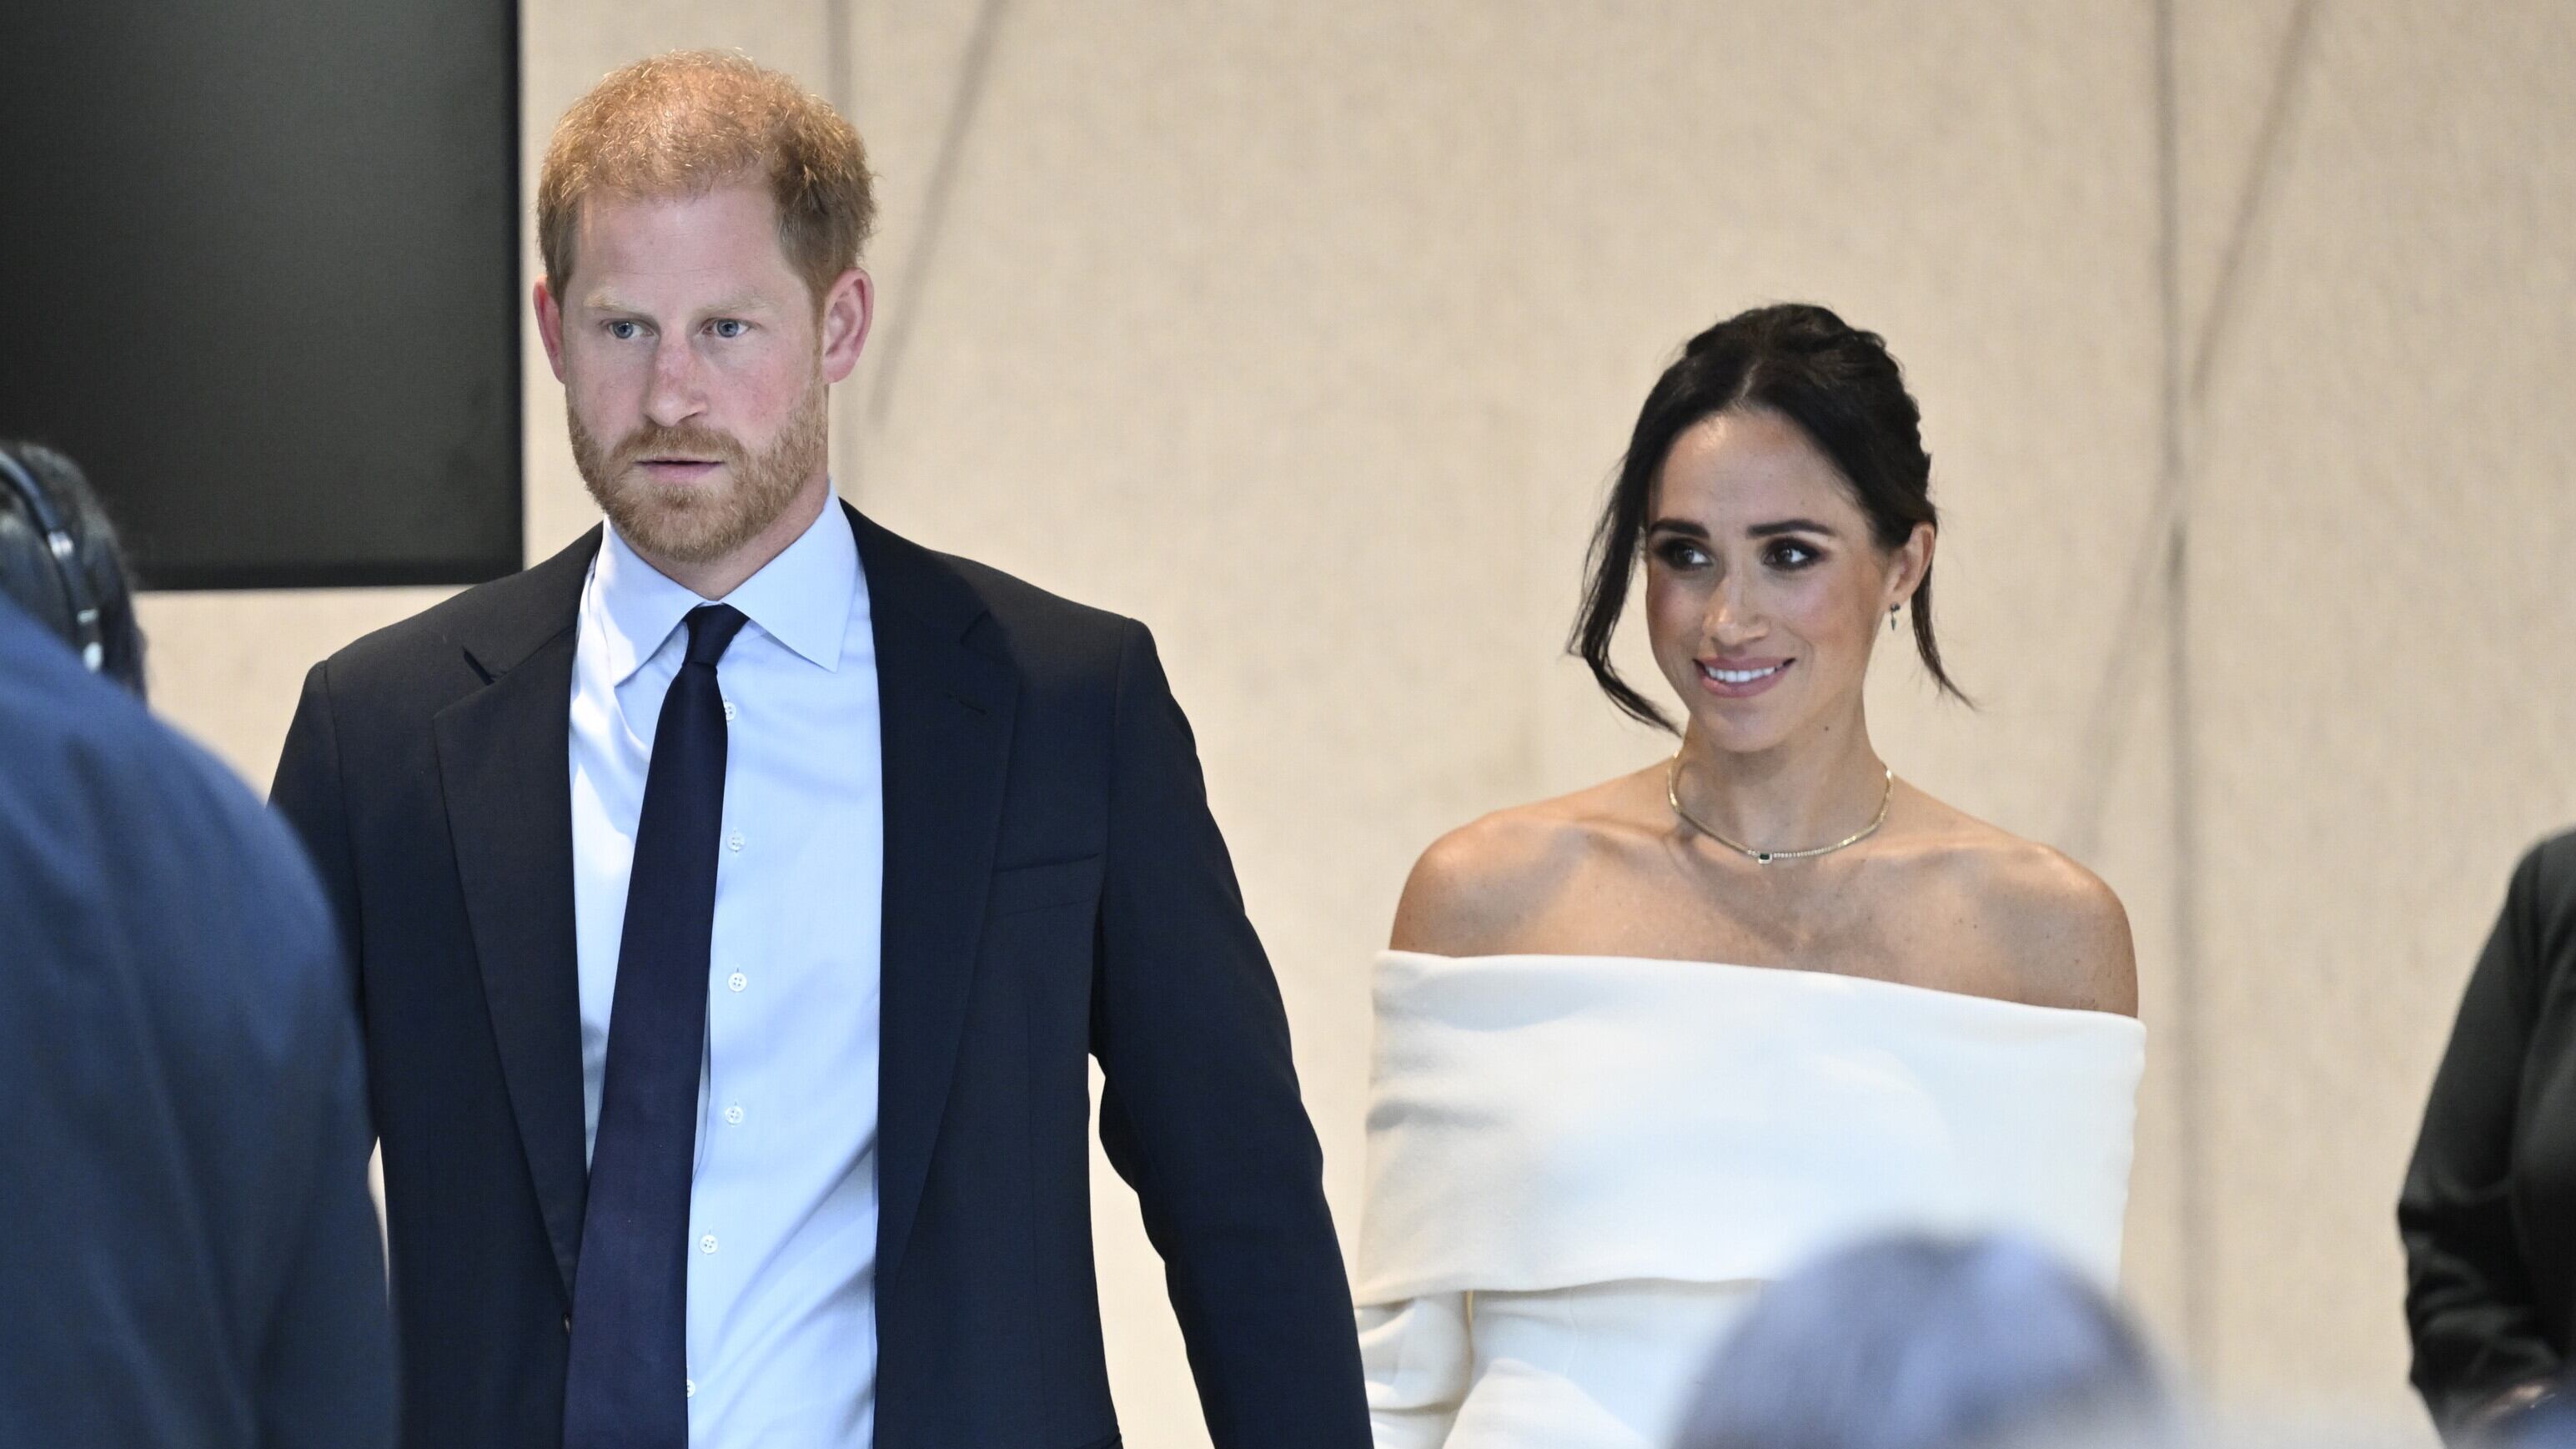 The Duke and Duchess of Sussex participate in The Archewell Foundation Parents’ Summit in New York (Evan Agostini/Invision/AP)